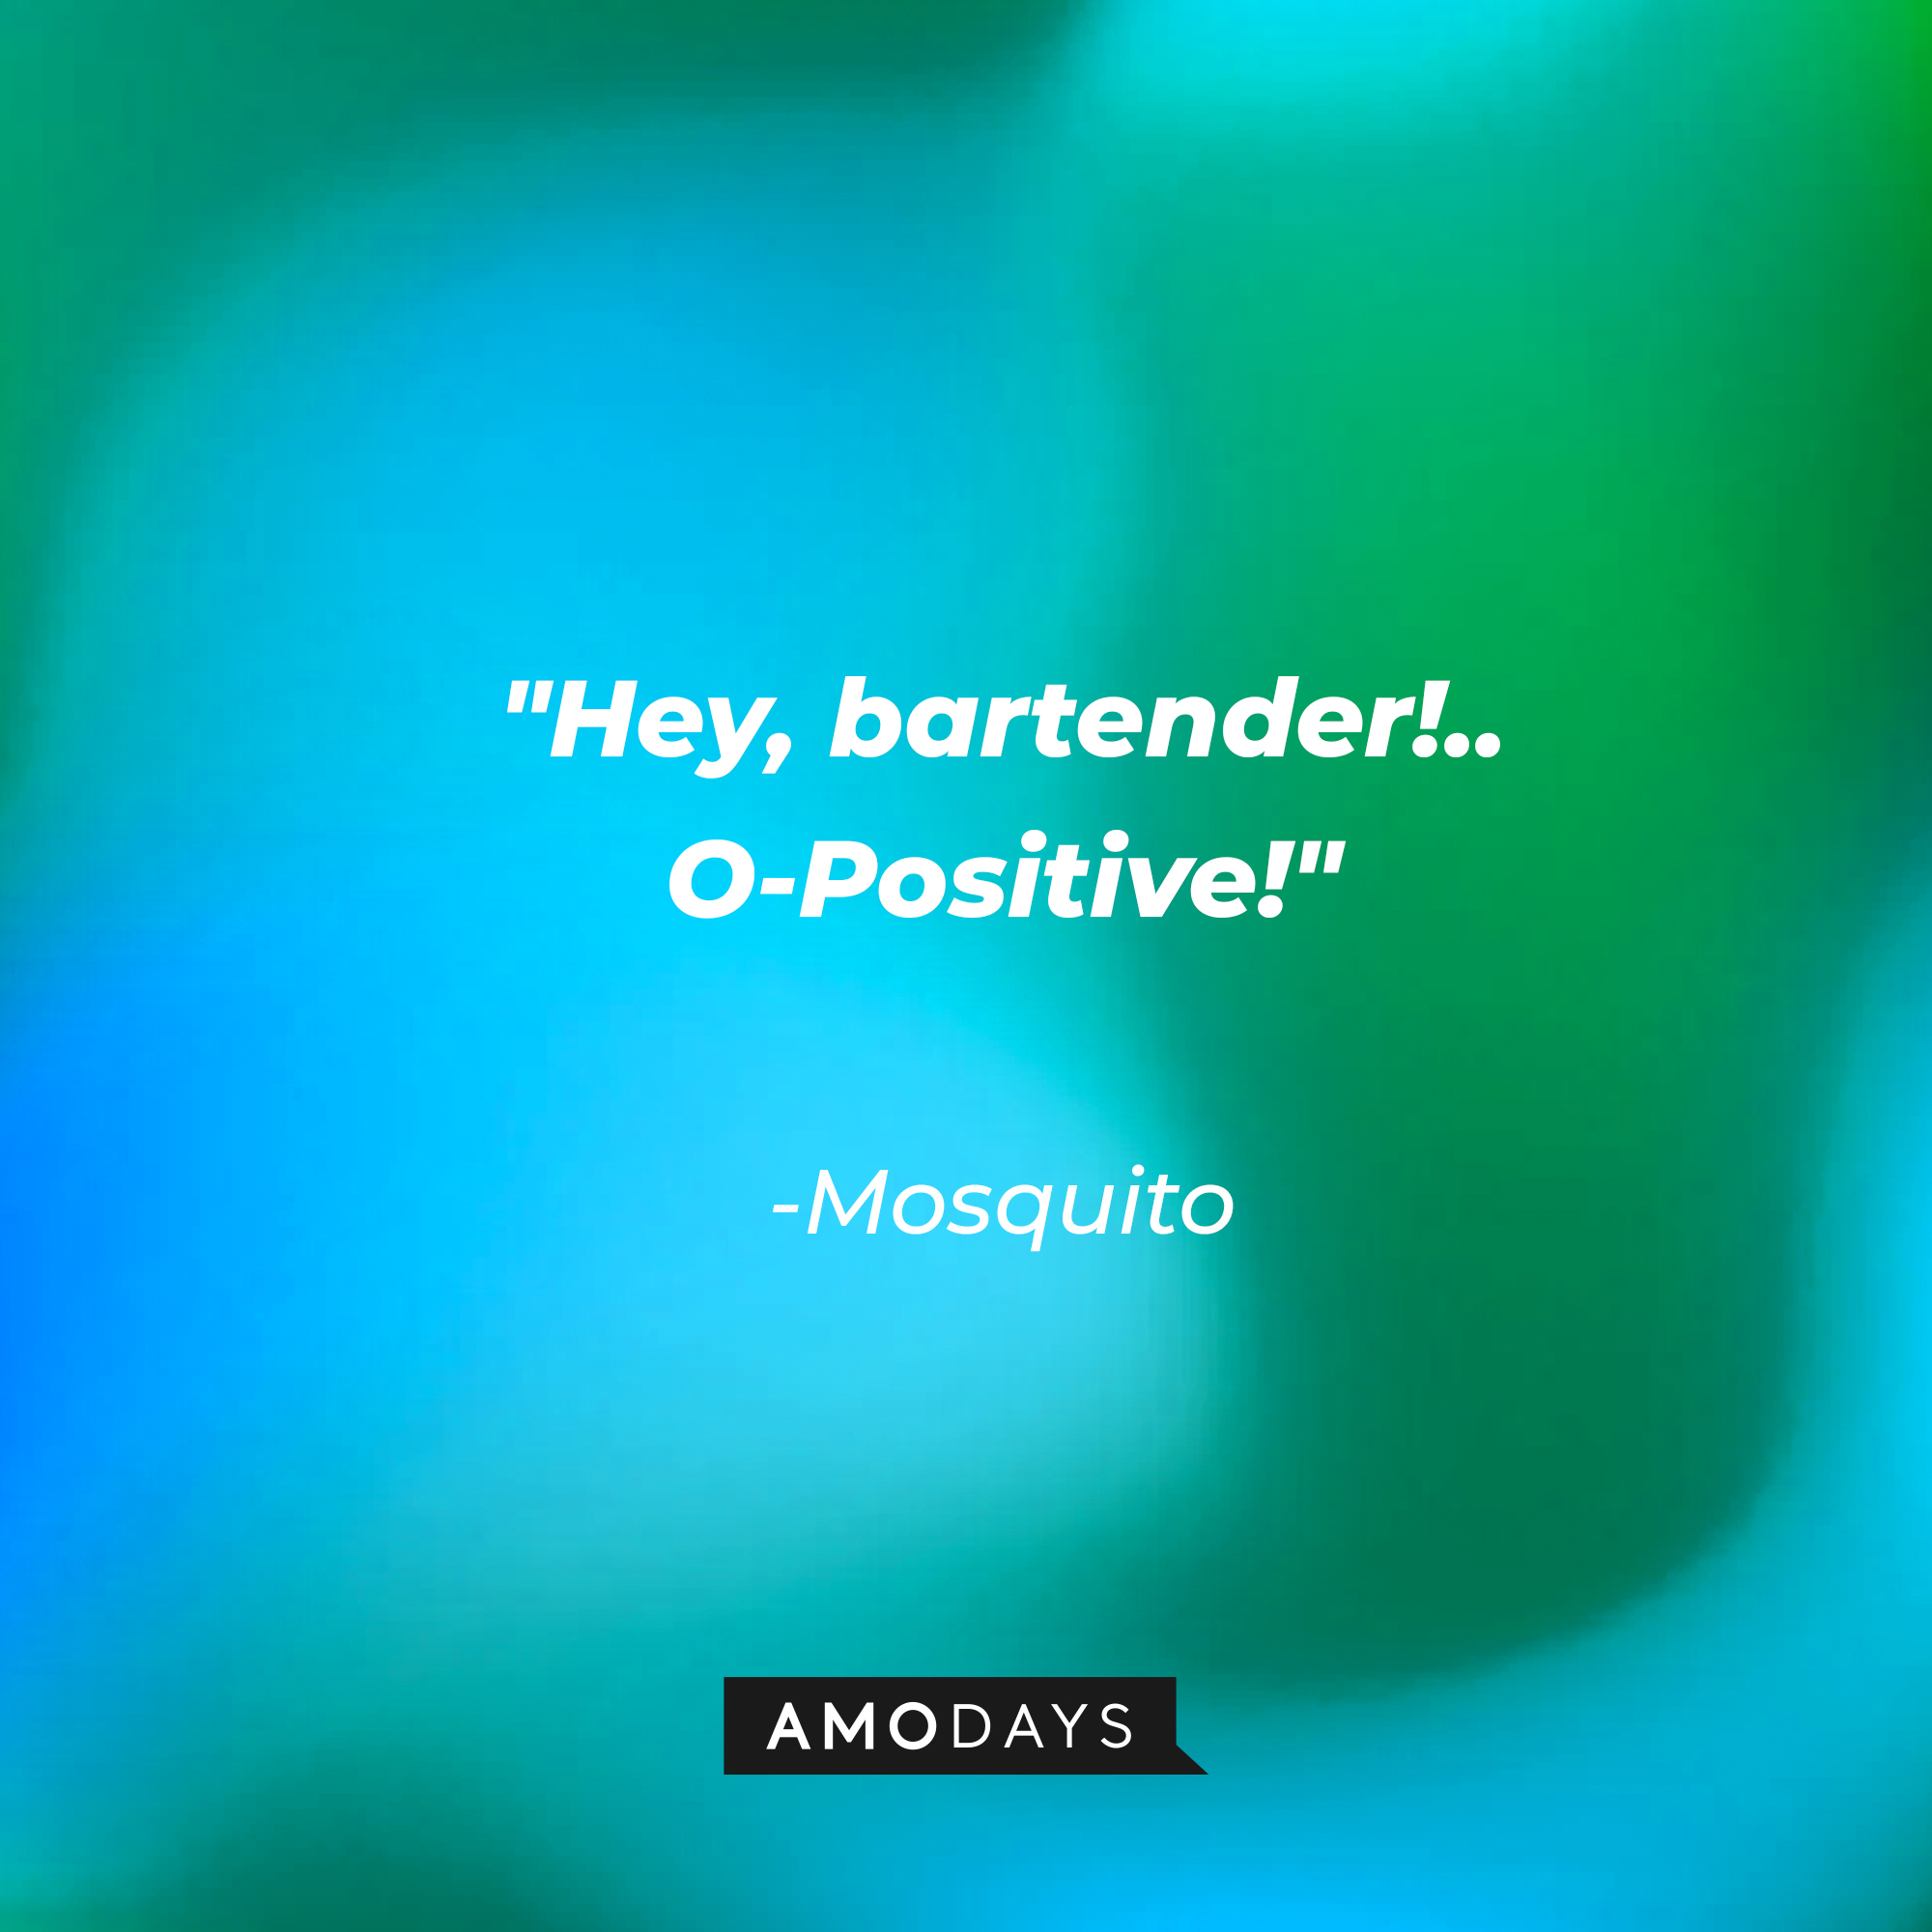 Mosquito's quote: "Hey, bartender!.. O-Positive!" | Source: AmoDays